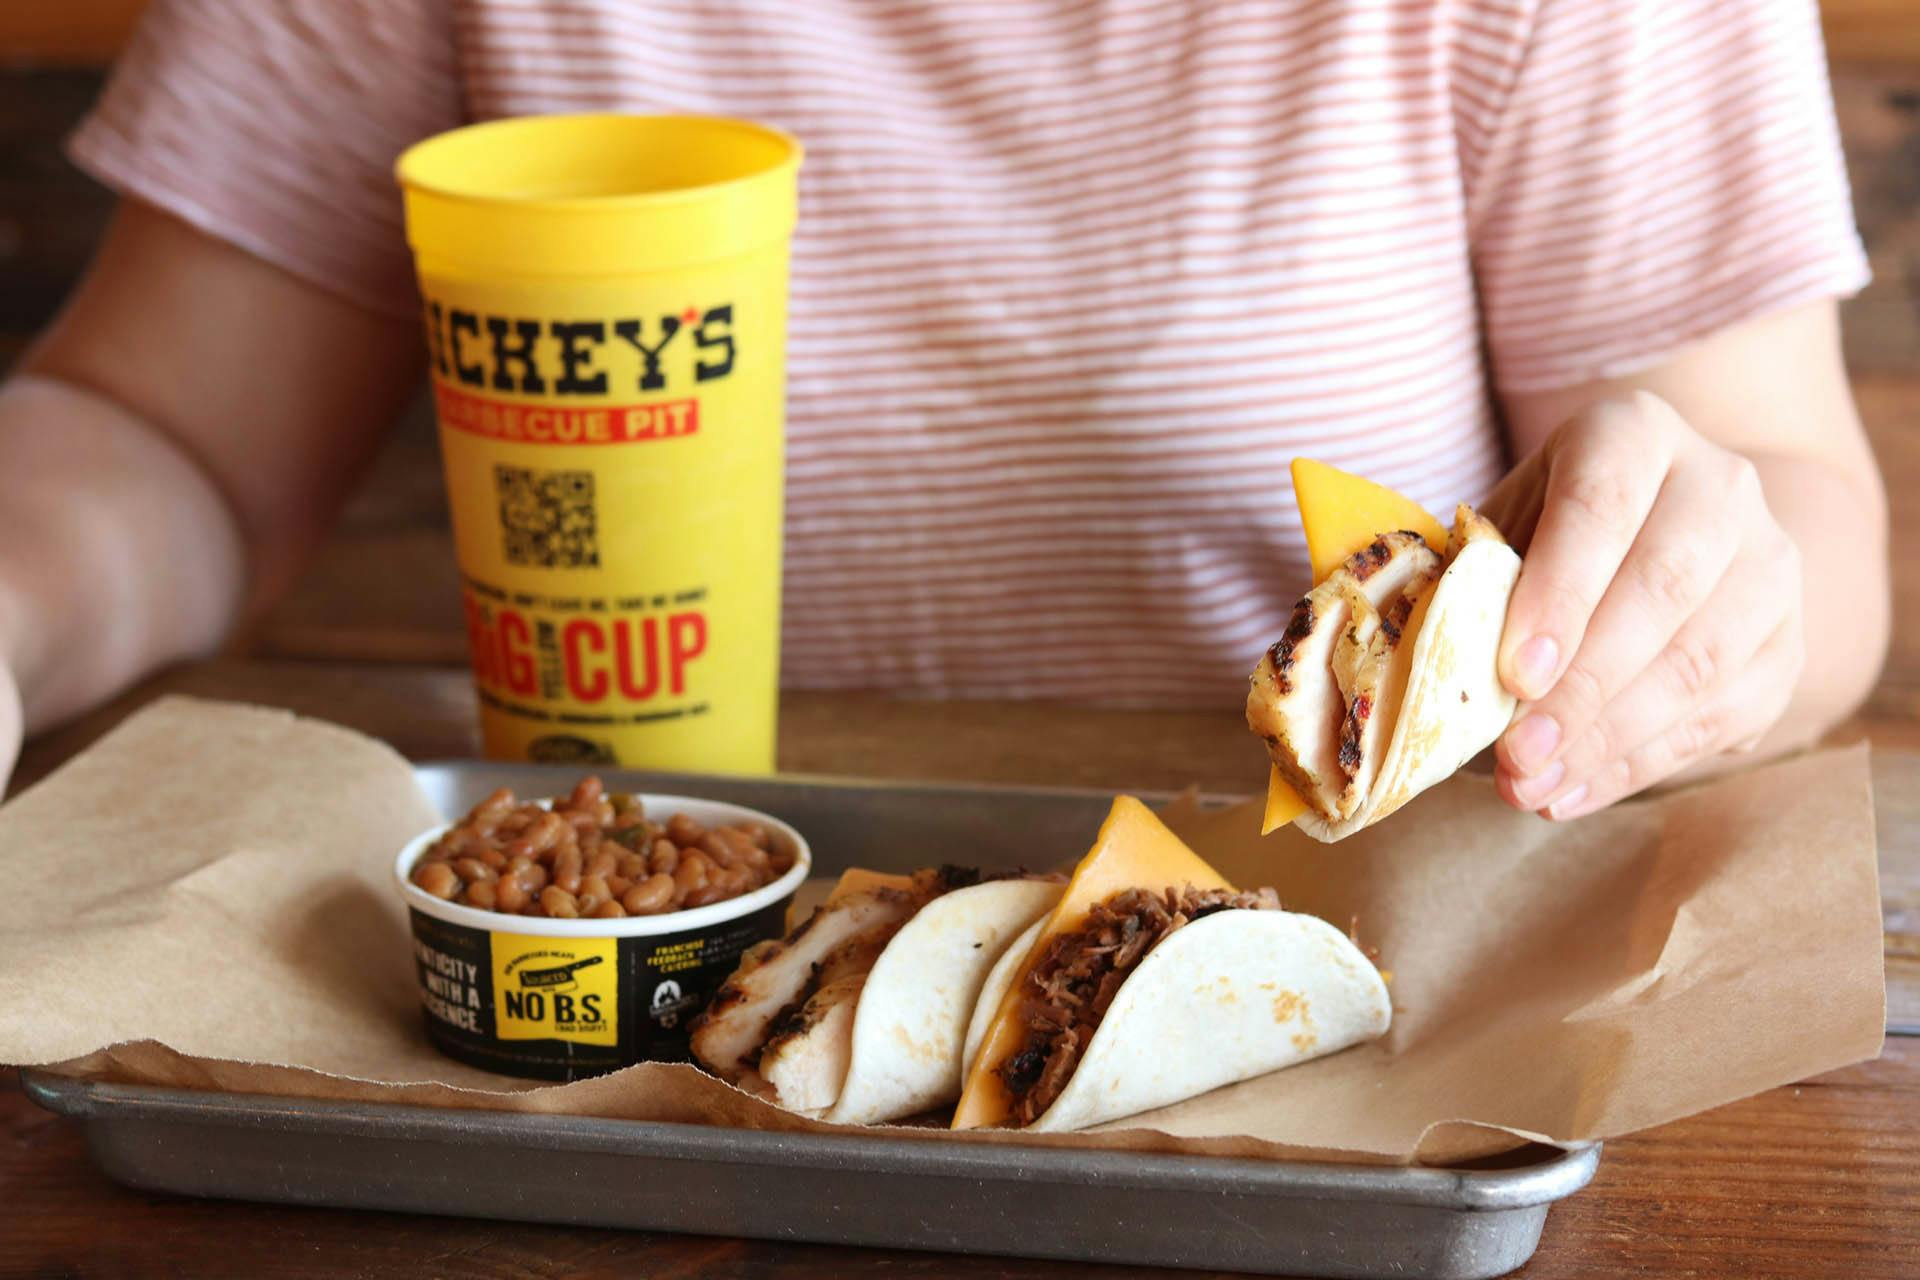 Dickey’s Barbecue Pit Brings Slow Smoked Barbecue to Eagle, Idaho